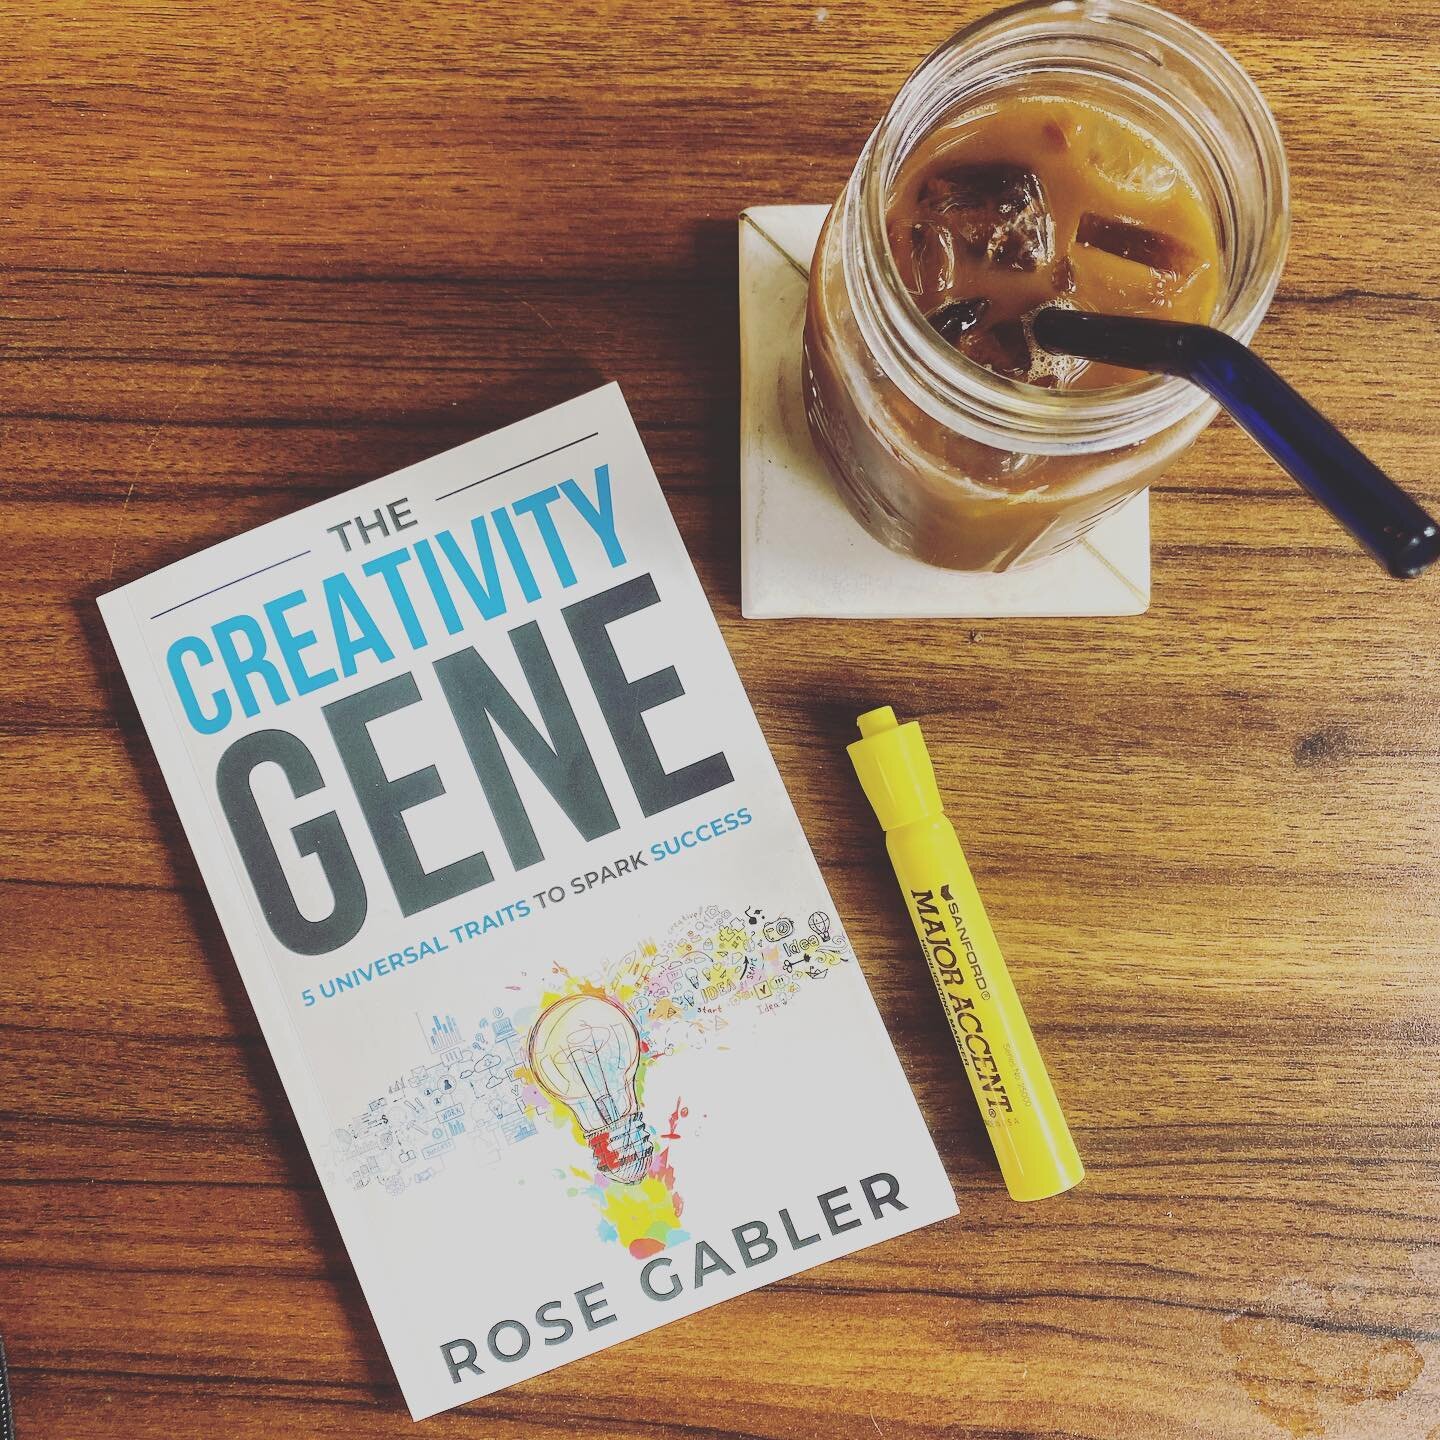 It&rsquo;s been almost ONE YEAR since &ldquo;The Creativity Gene: 5 Universal Traits to Spark Success&rdquo; was published and this year has been incredible. 

The connections and growth I have received from this experience has fueled a love of writi